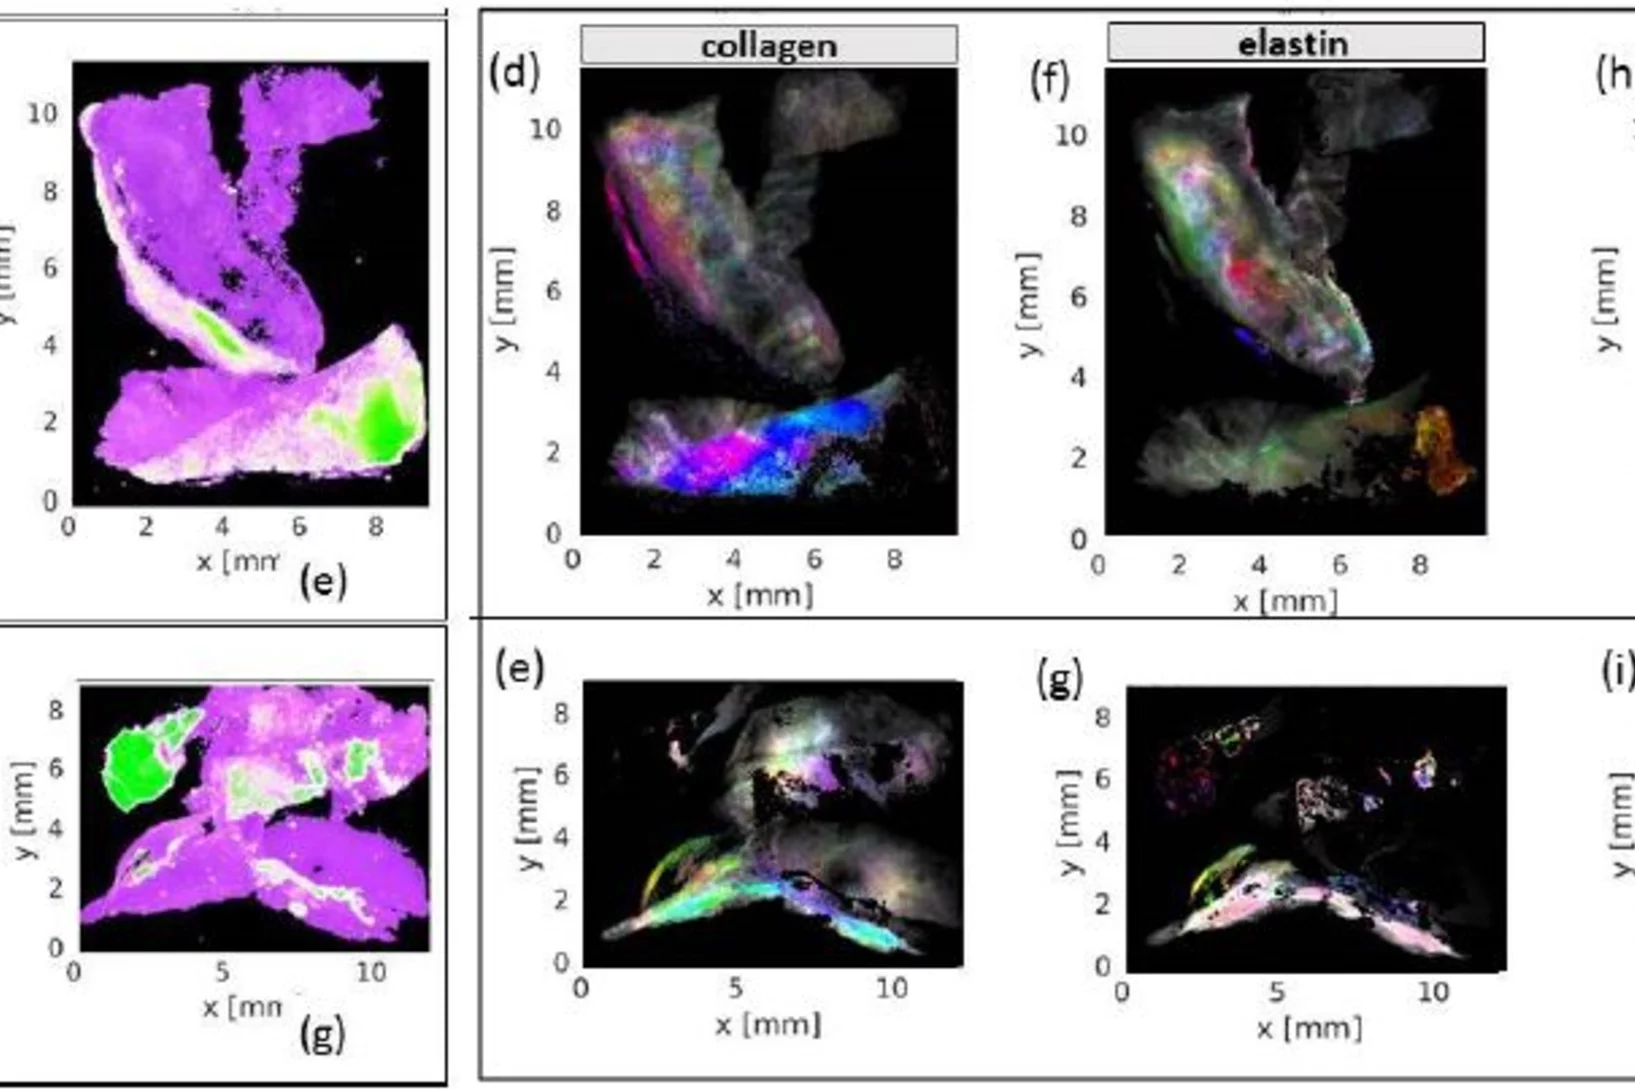 Micro- and nano-calcifications as well as collagen, elastin and myofilament have been mapped using scanning SAXS and WAXS